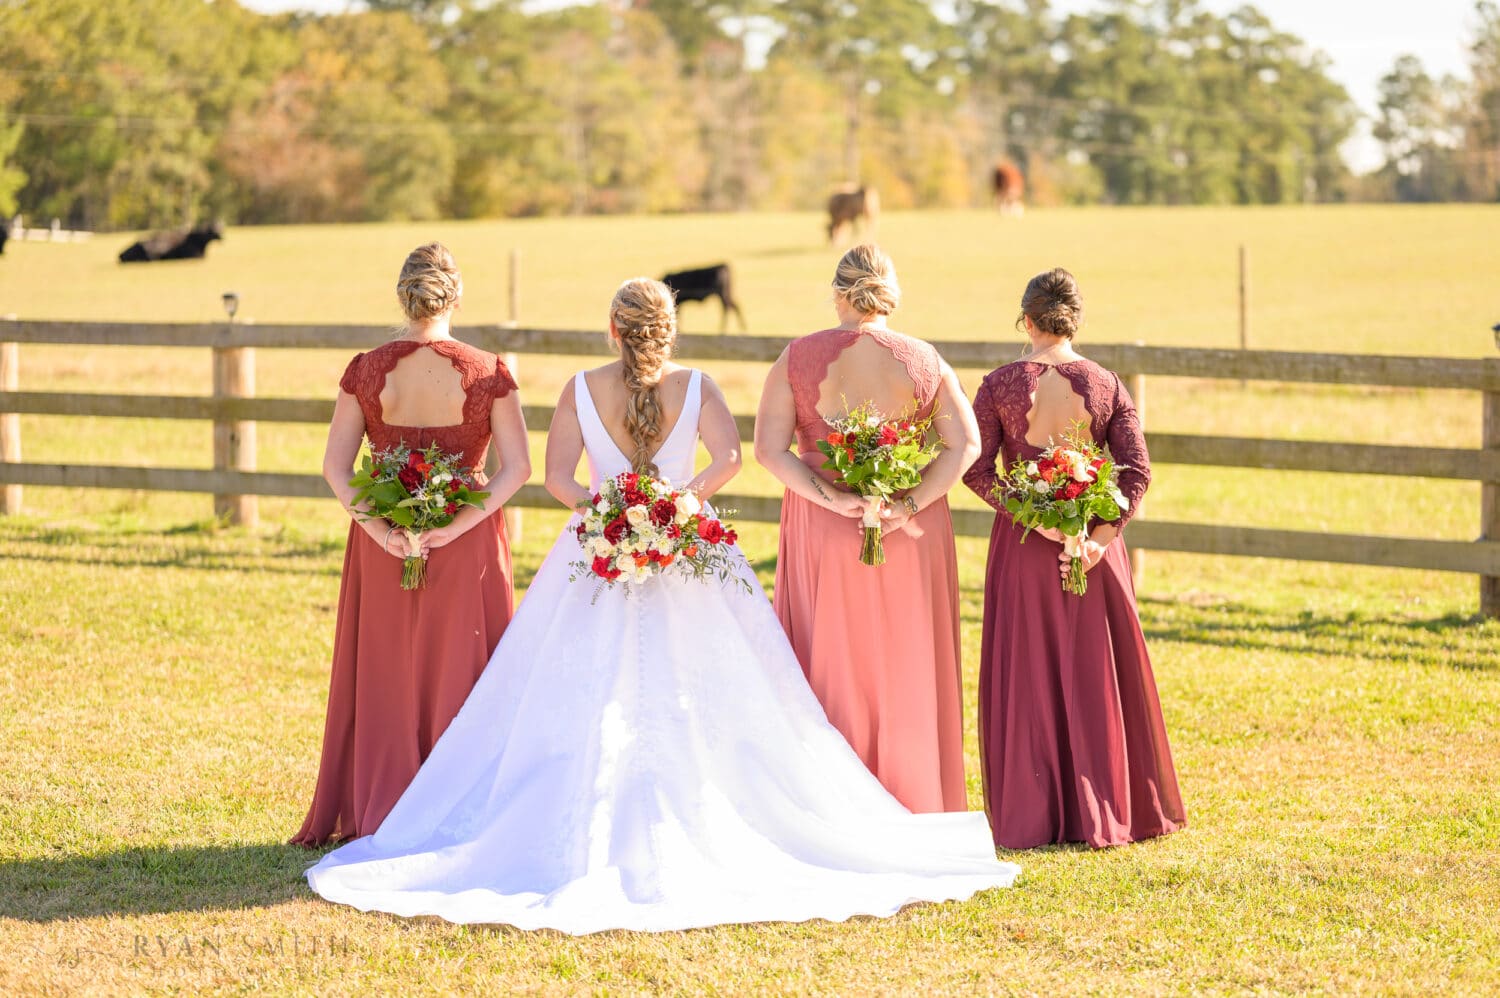 Bridesmaids holding flowers behind their backs - The Blessed Barn